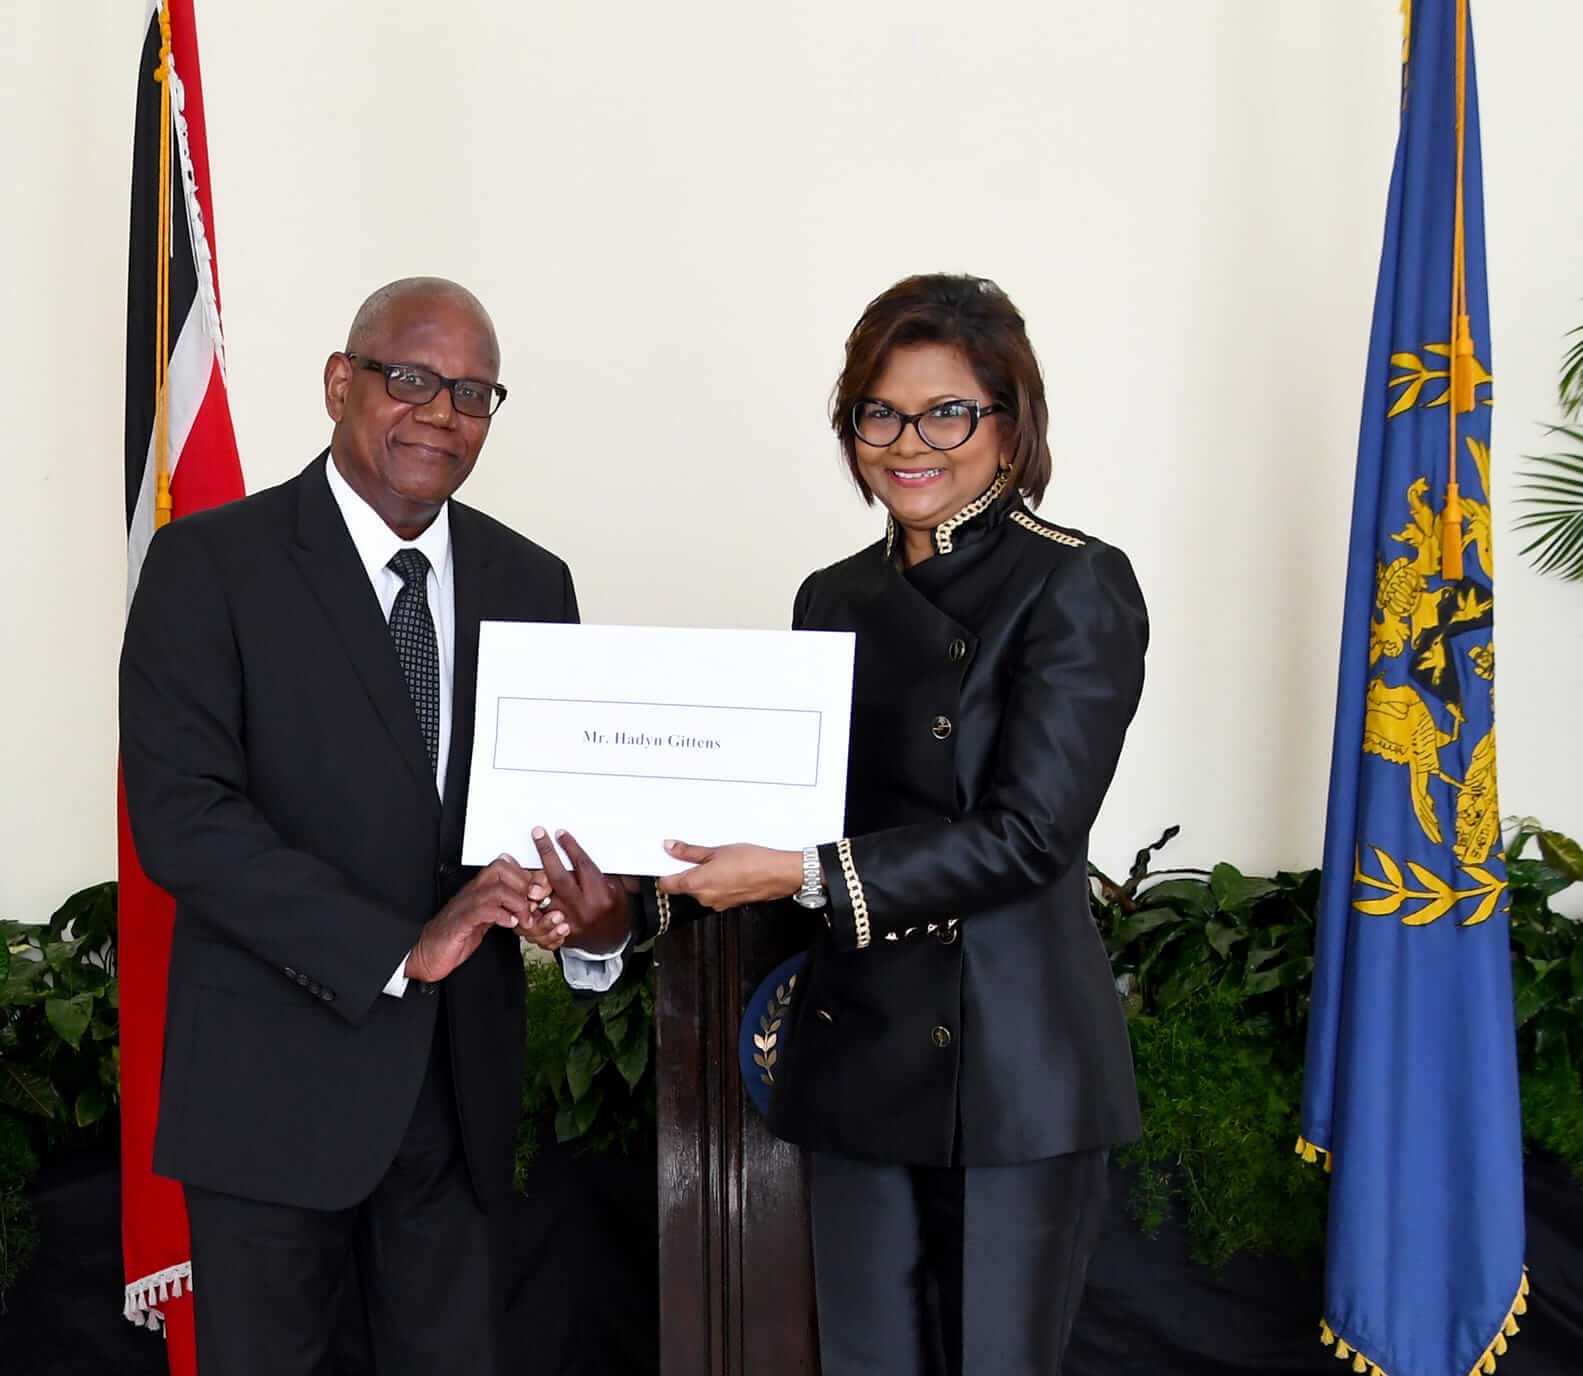 Swearing-in of the Chairman of the Integrity Commission